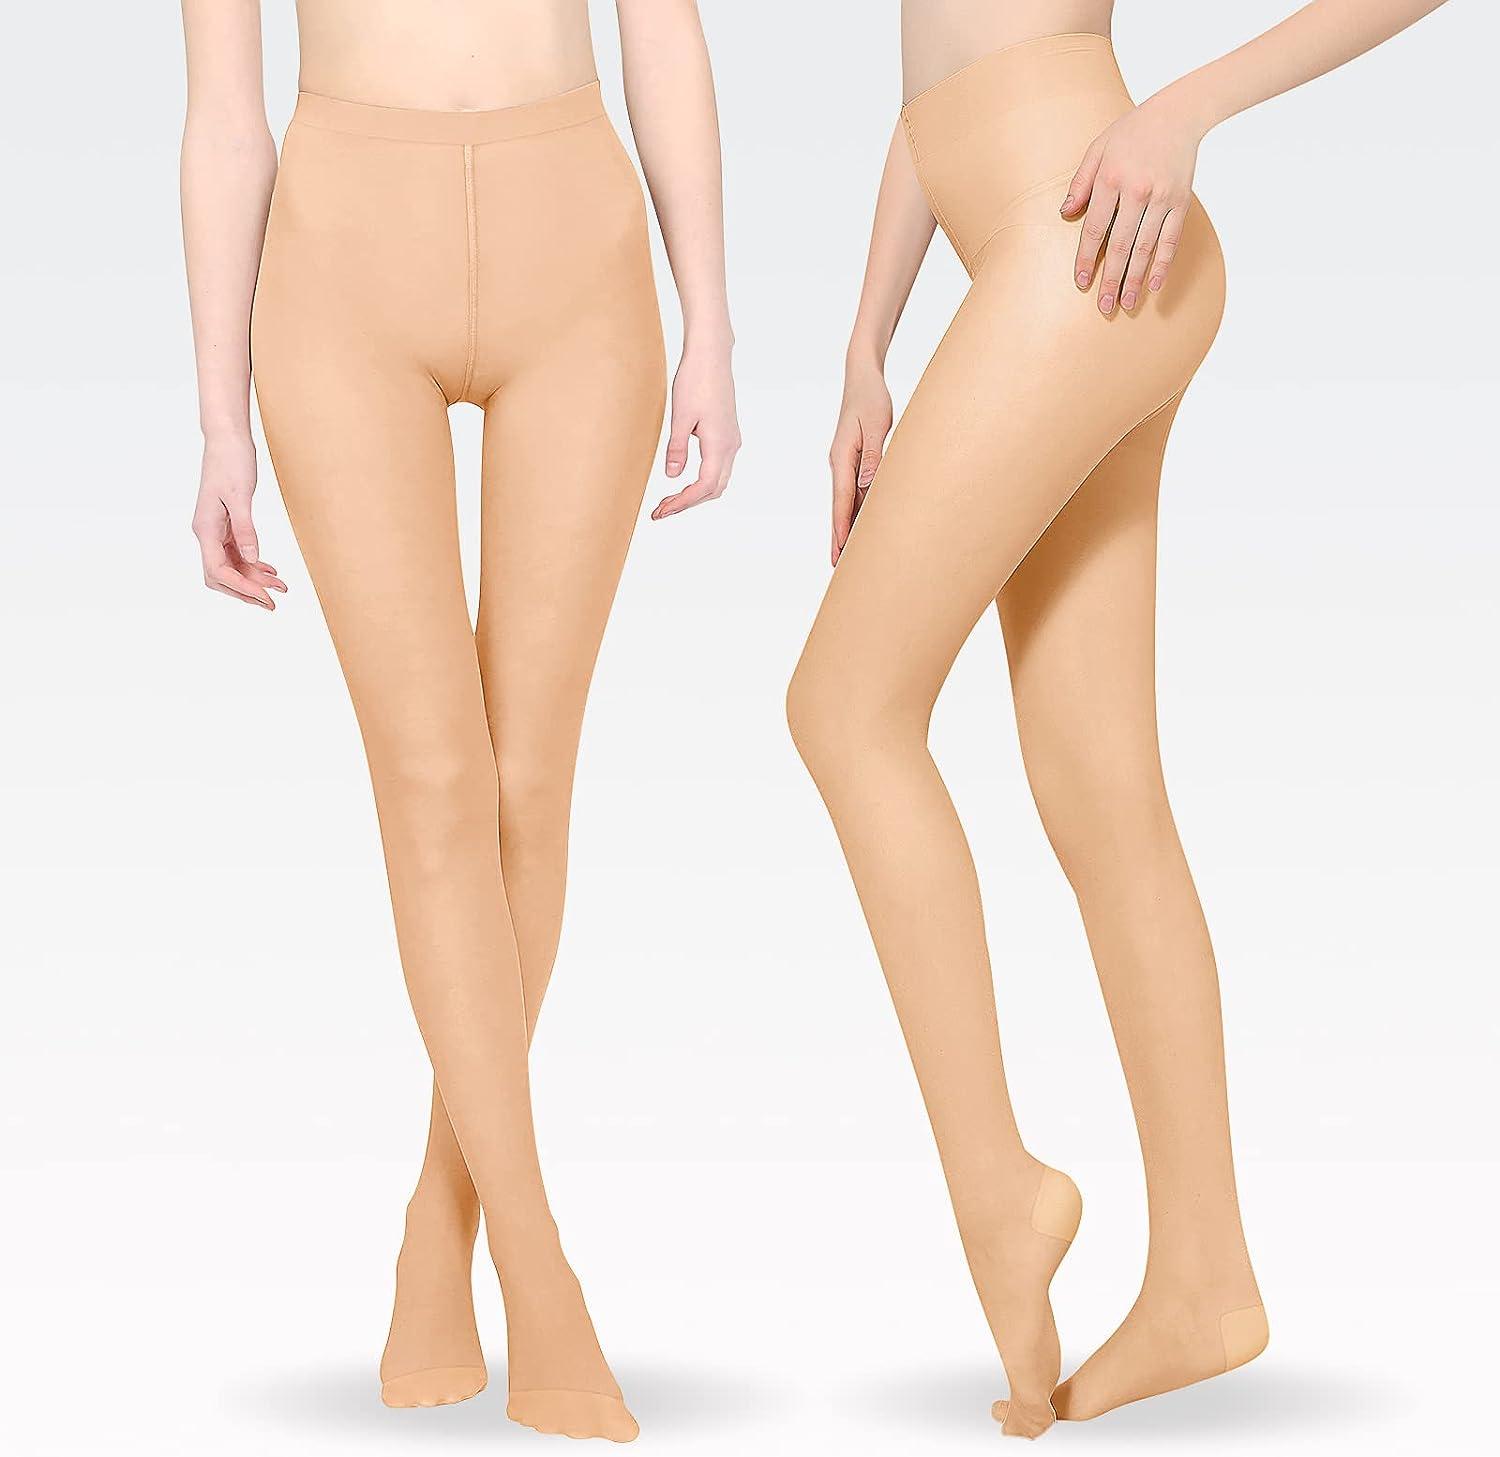 Medical Compression stockings and tights for varicose veins and